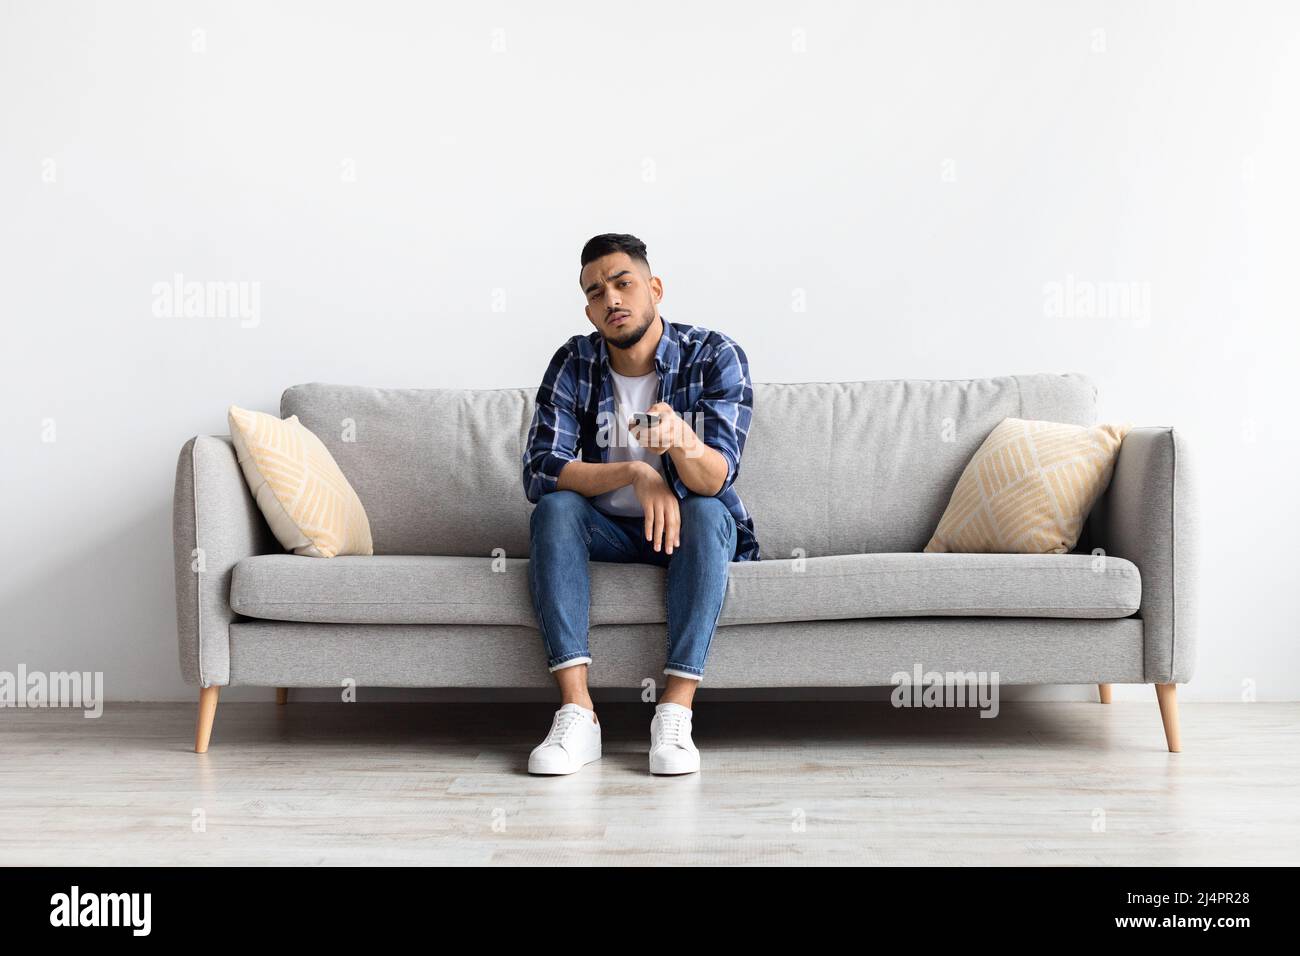 Bored young man watching television sitting on couch Stock Photo